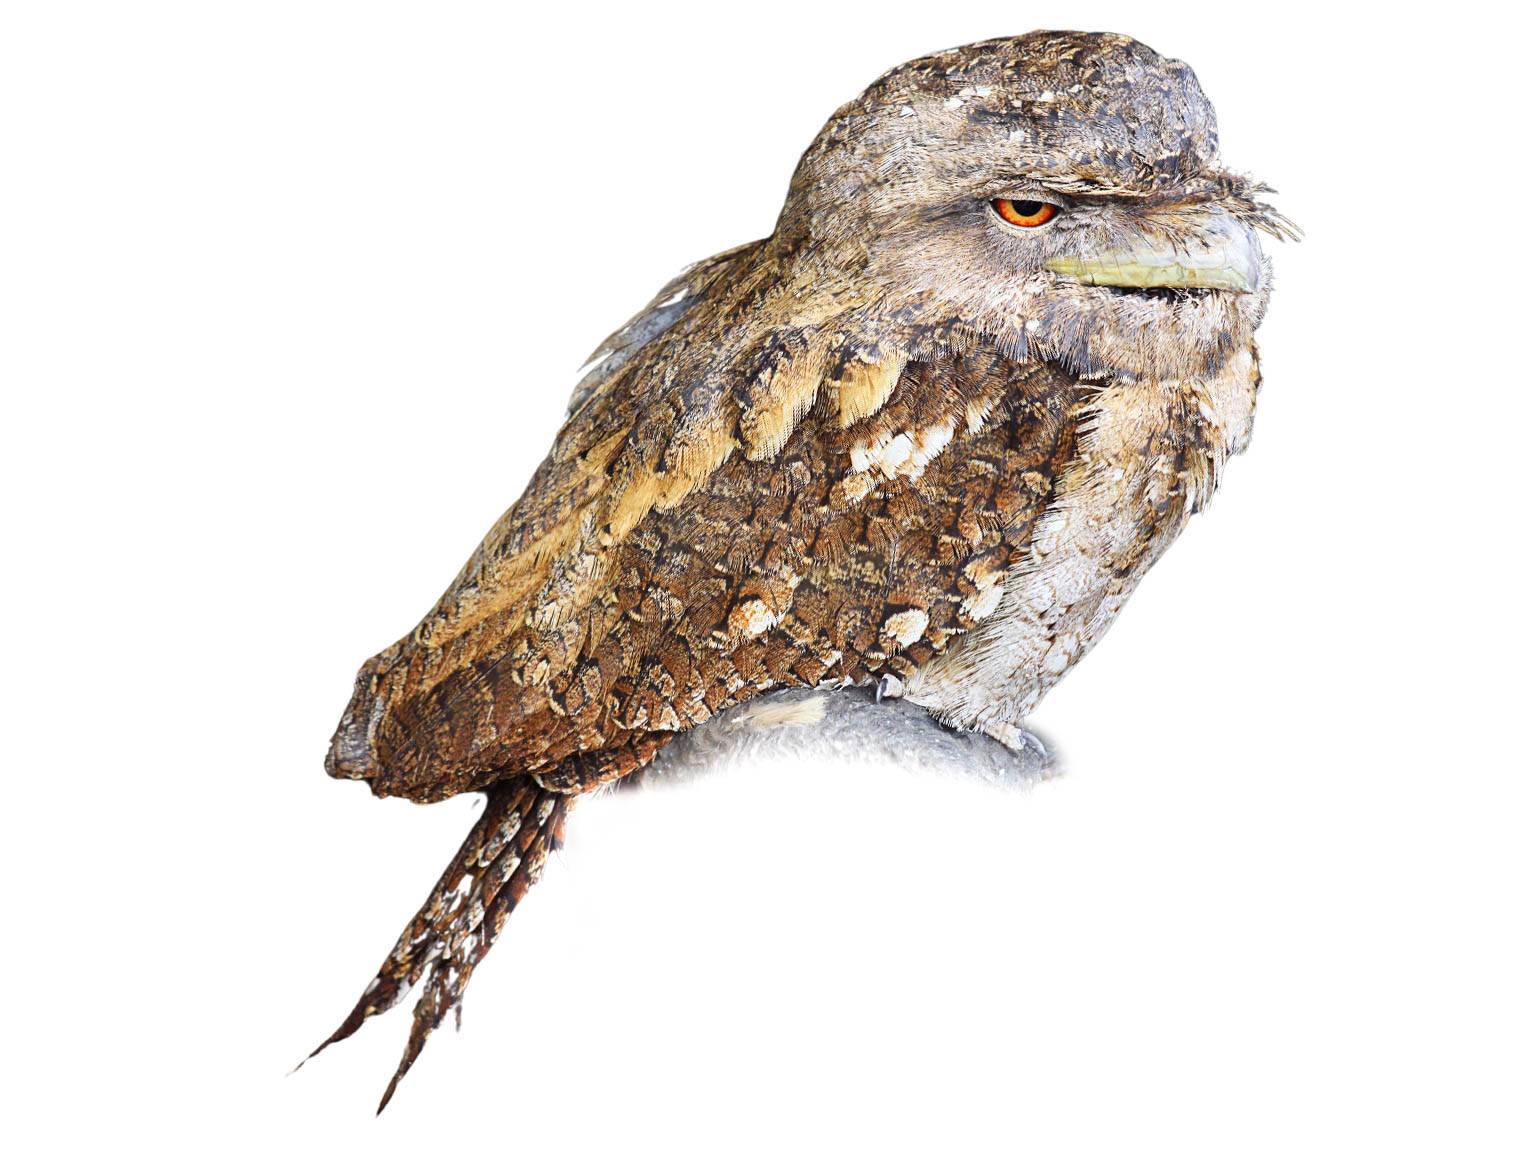 A photo of a Papuan Frogmouth (Podargus papuensis)